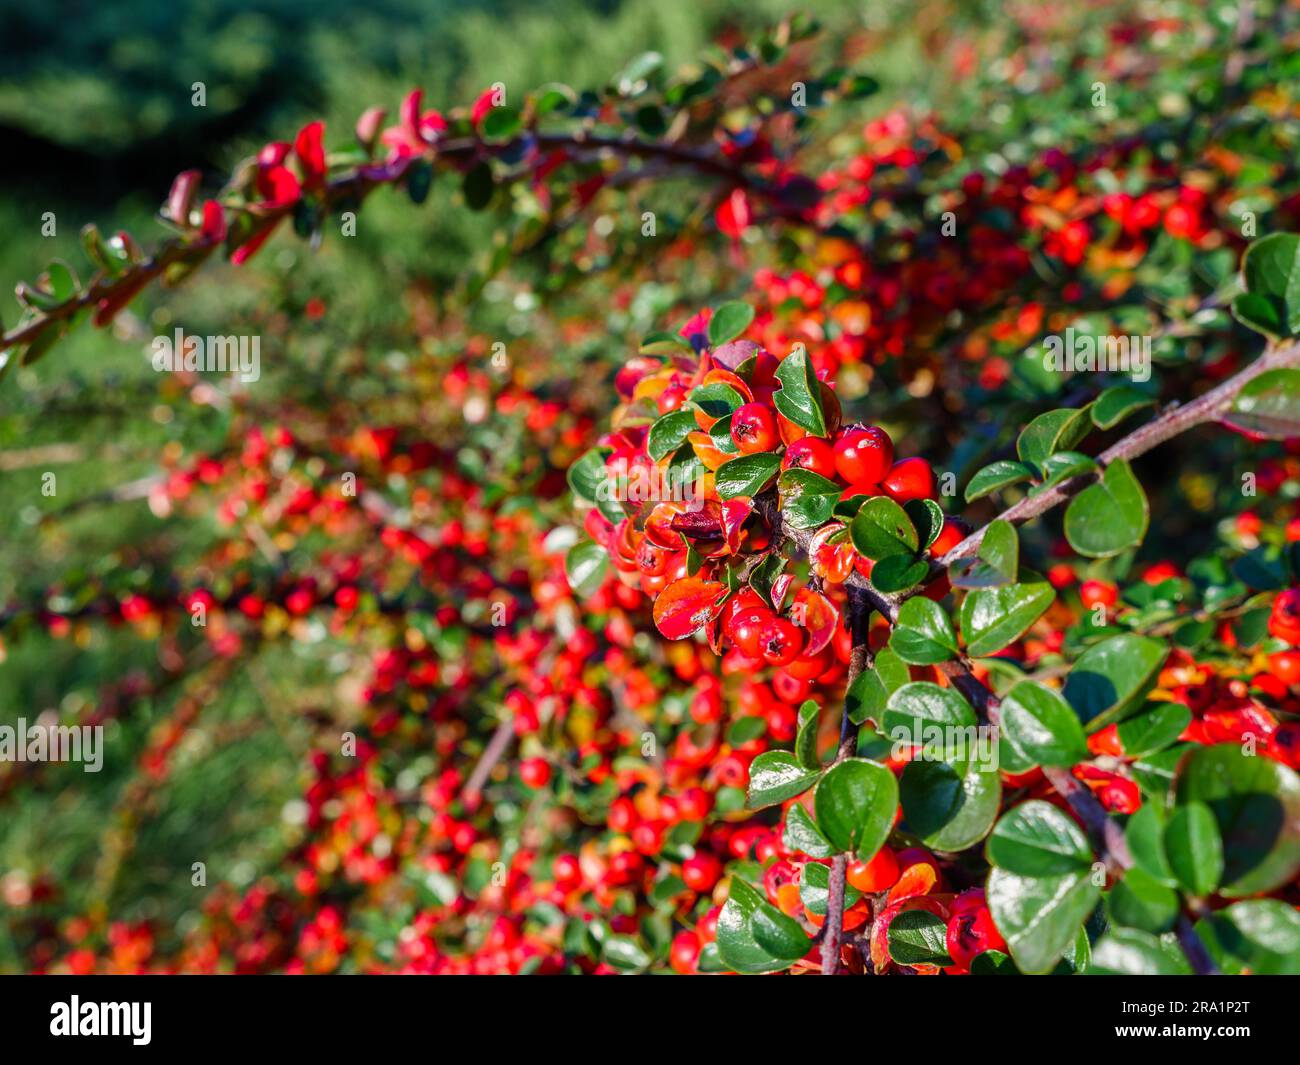 Gorgeous cotoneaster bush with long curvy tilted branches dotted with many small red and orange berries in a park on a sunny autumn day. Stock Photo